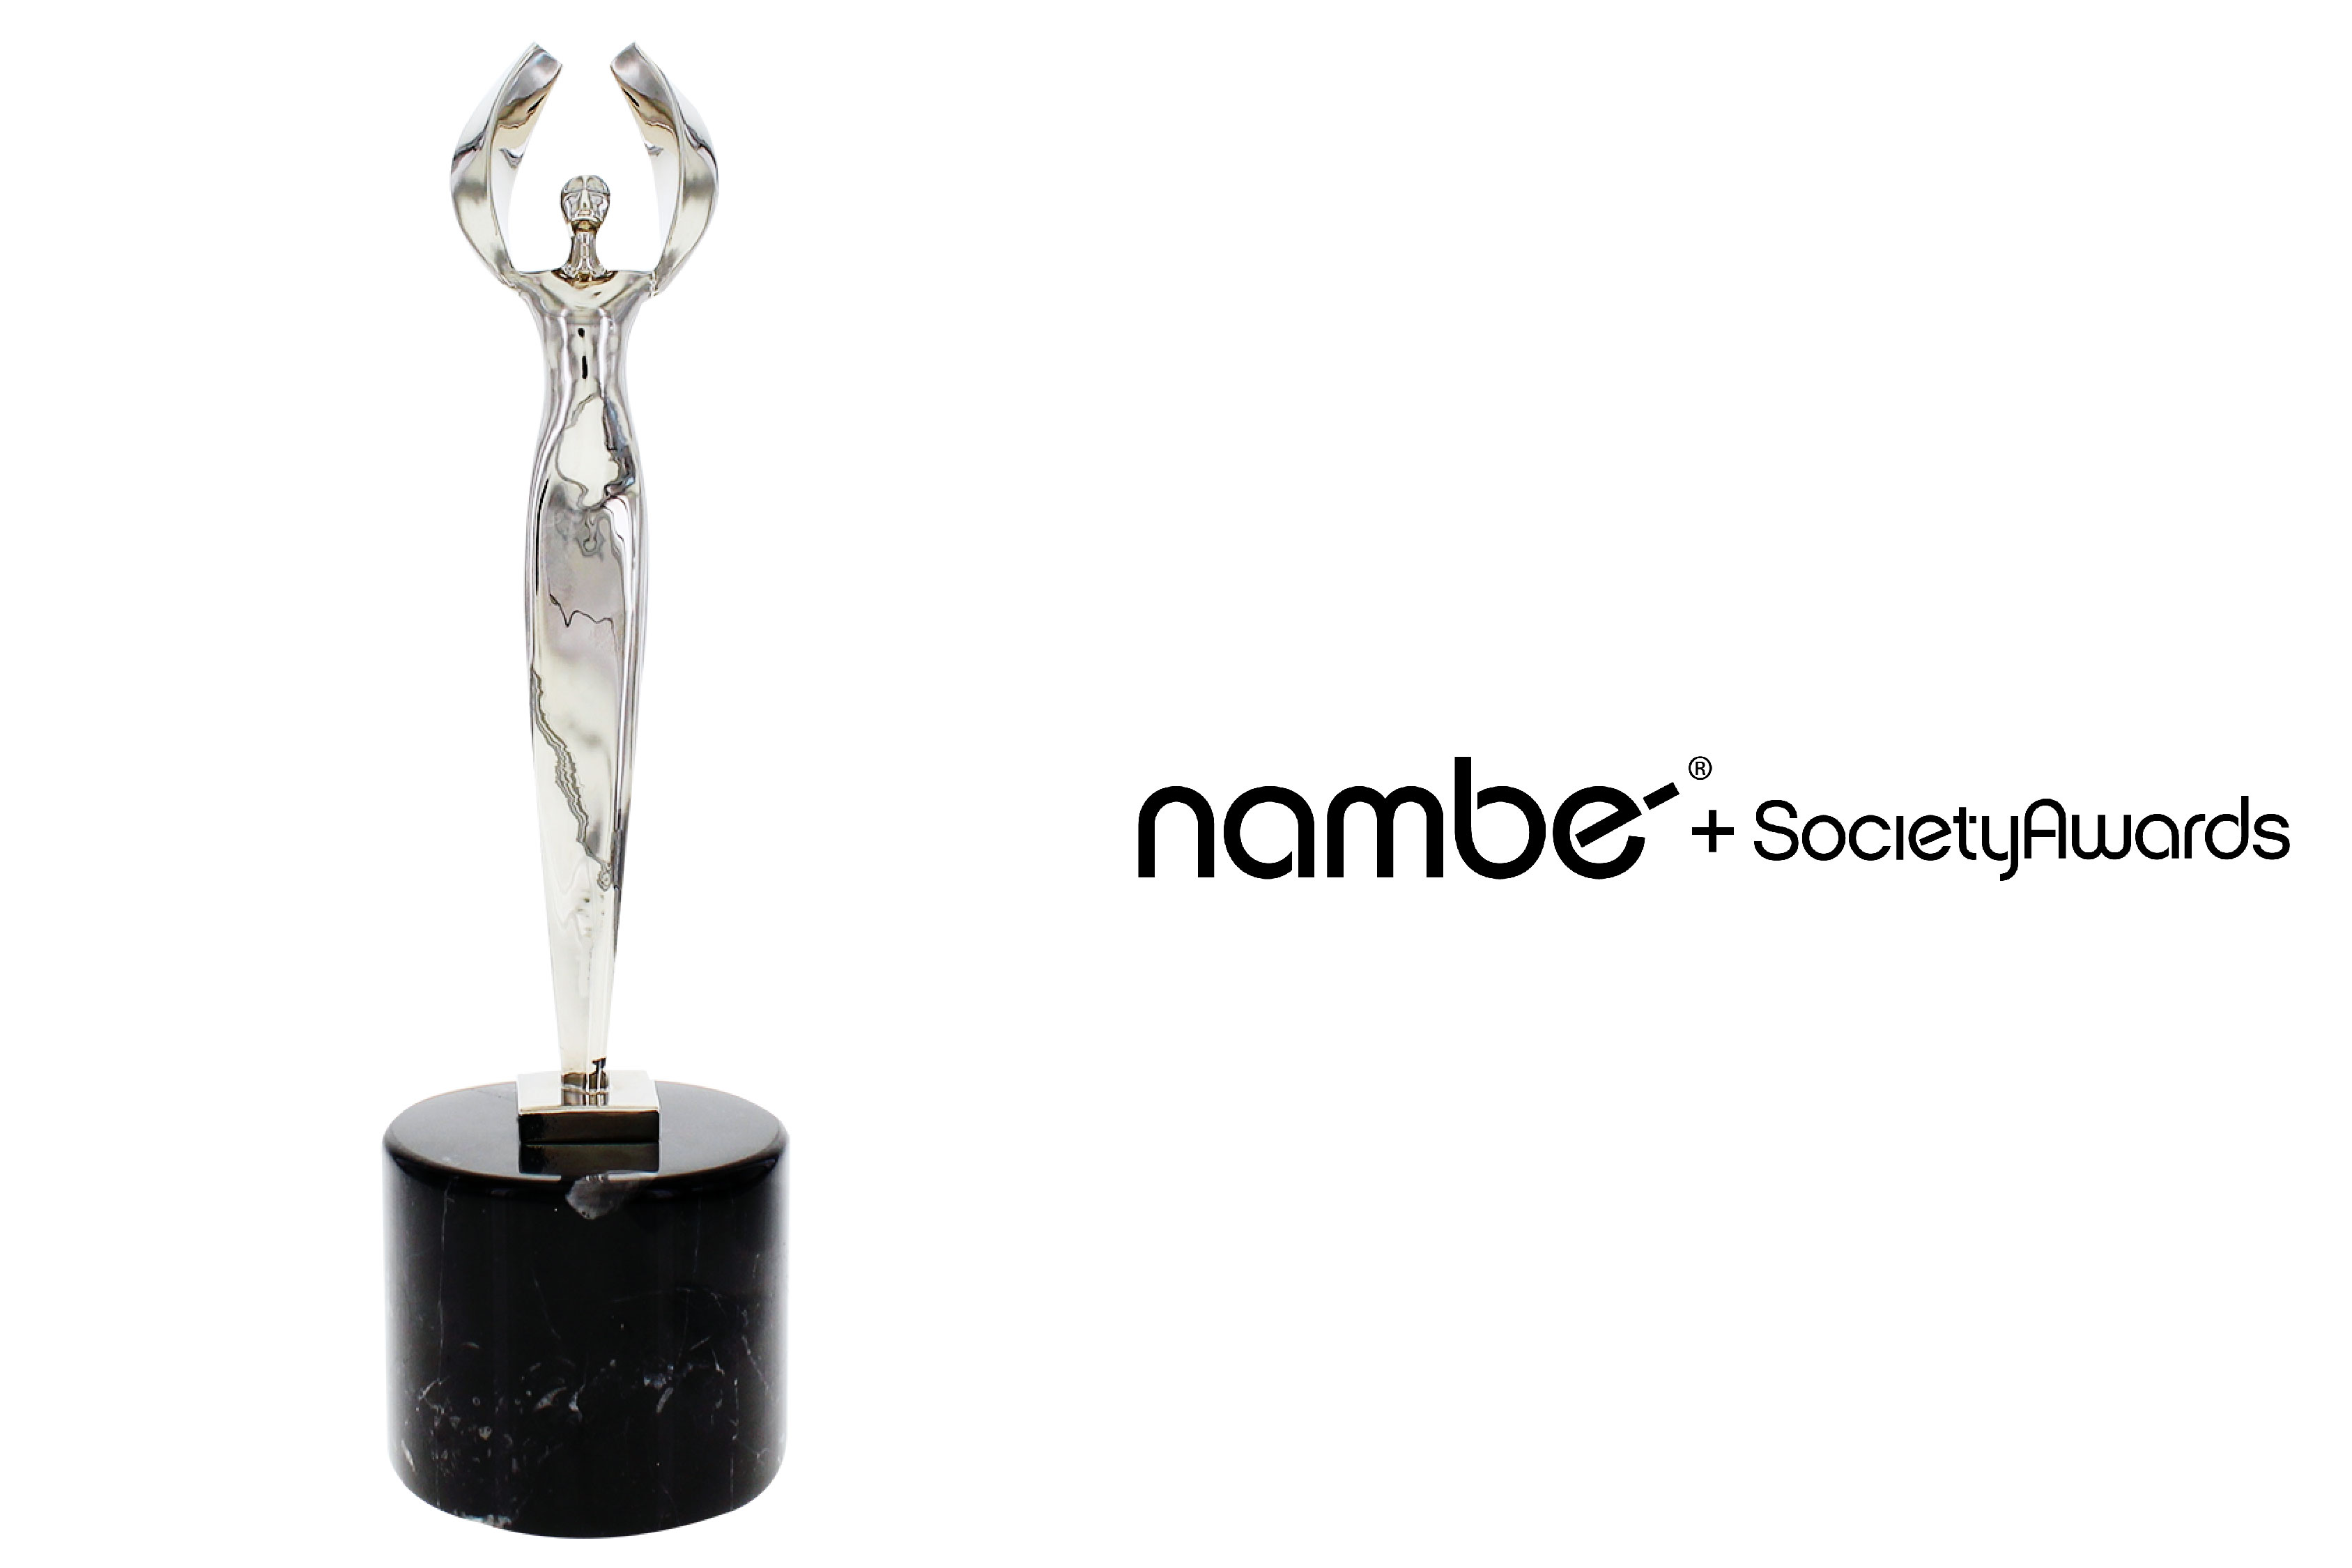 Namb Angel Trophy created in a collaboration with Society Awards next to the collaborative logo